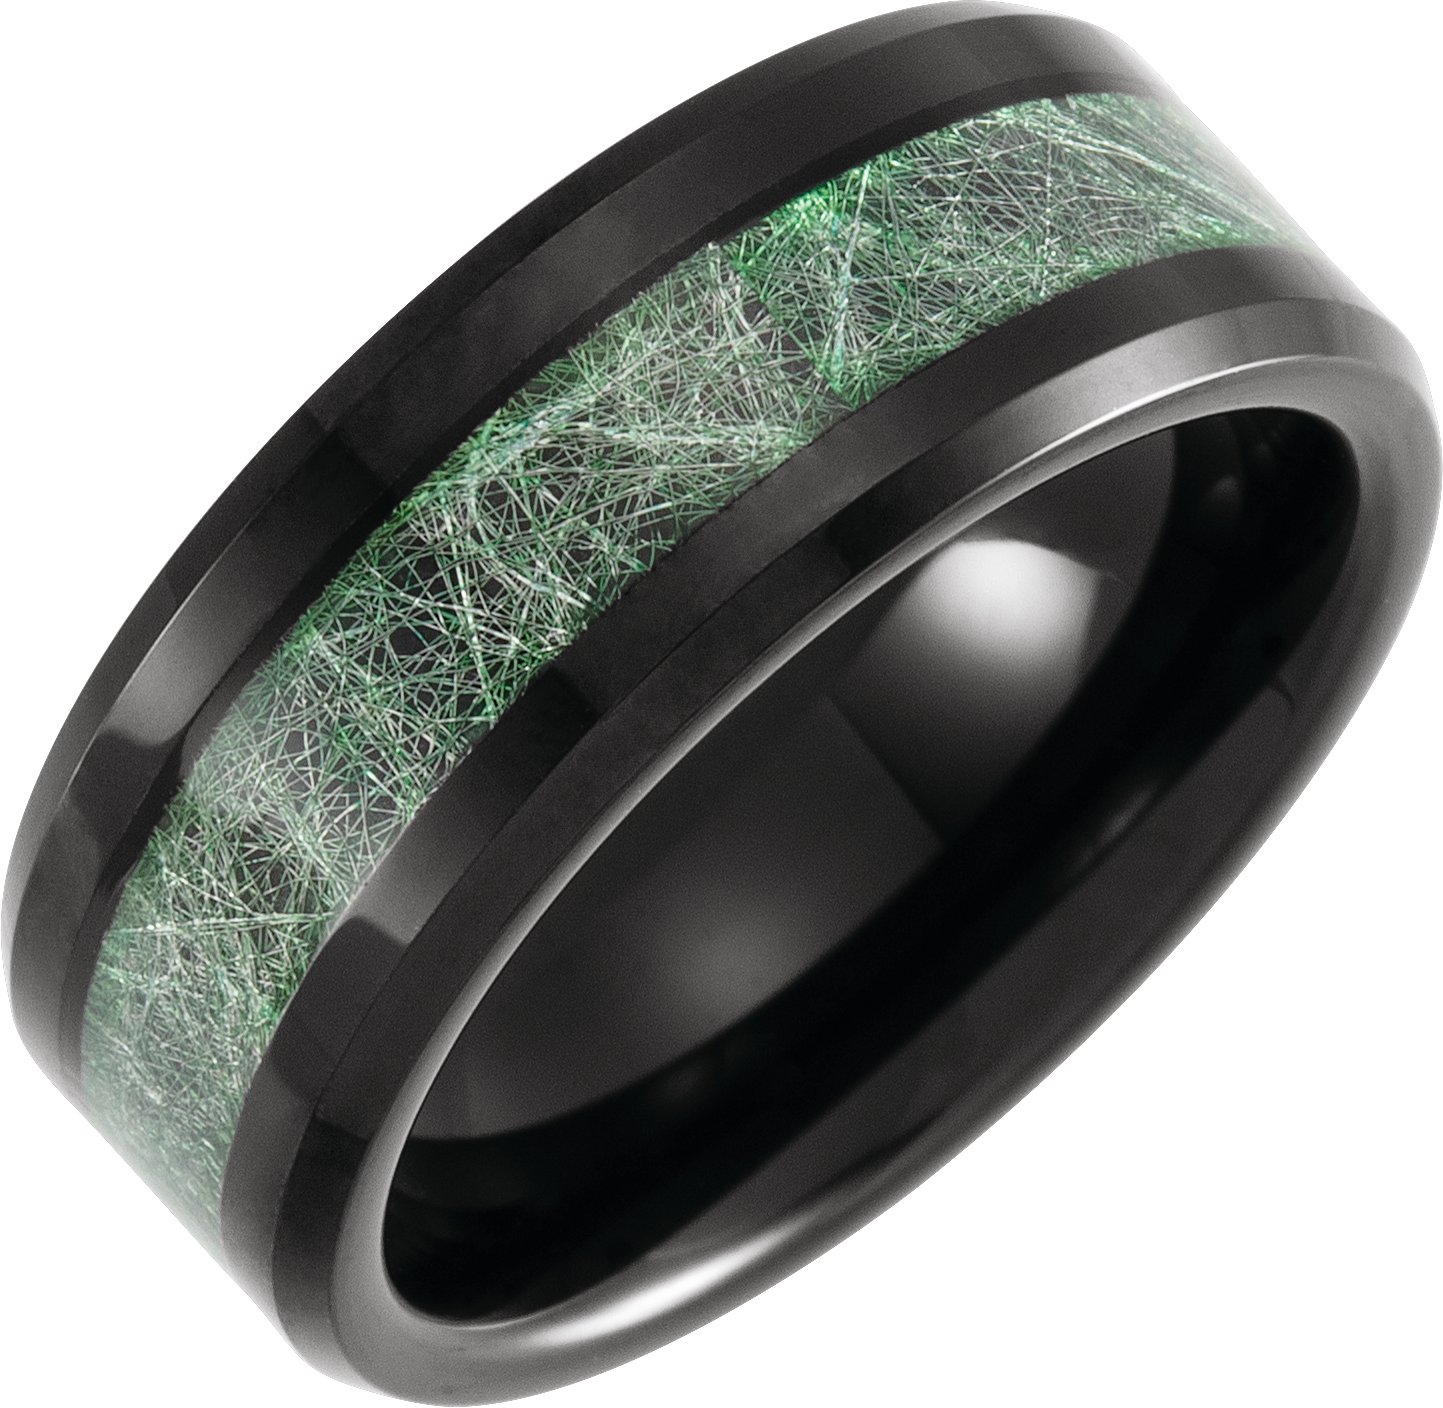 Tungsten 8 mm Beveled Band with Imitation Meteorite Inlay Size 11